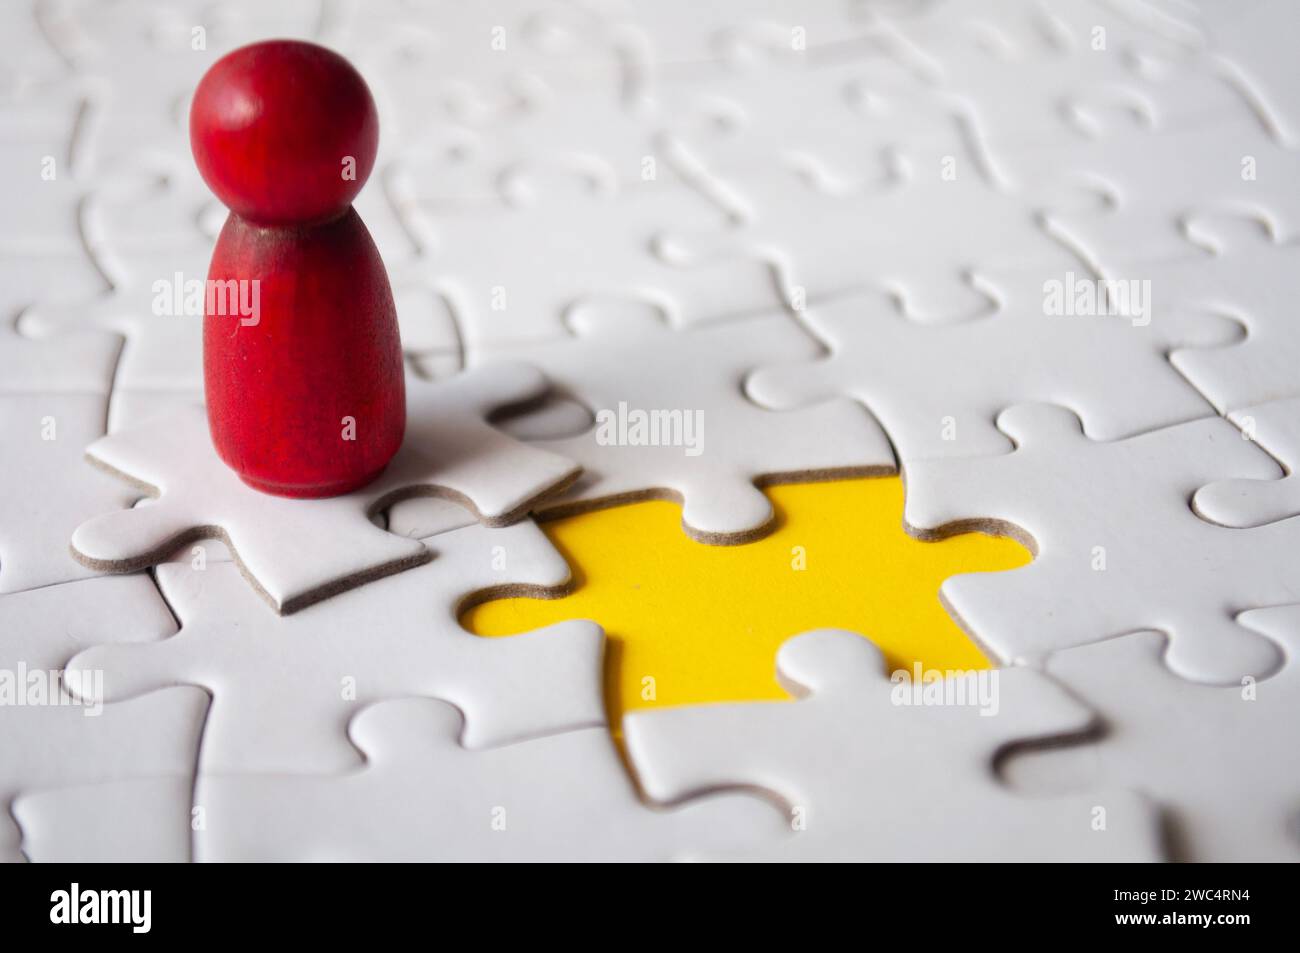 Red wooden doll on top of jigsaw with missing jigsaw puzzle. Hiring and employment concept. Stock Photo